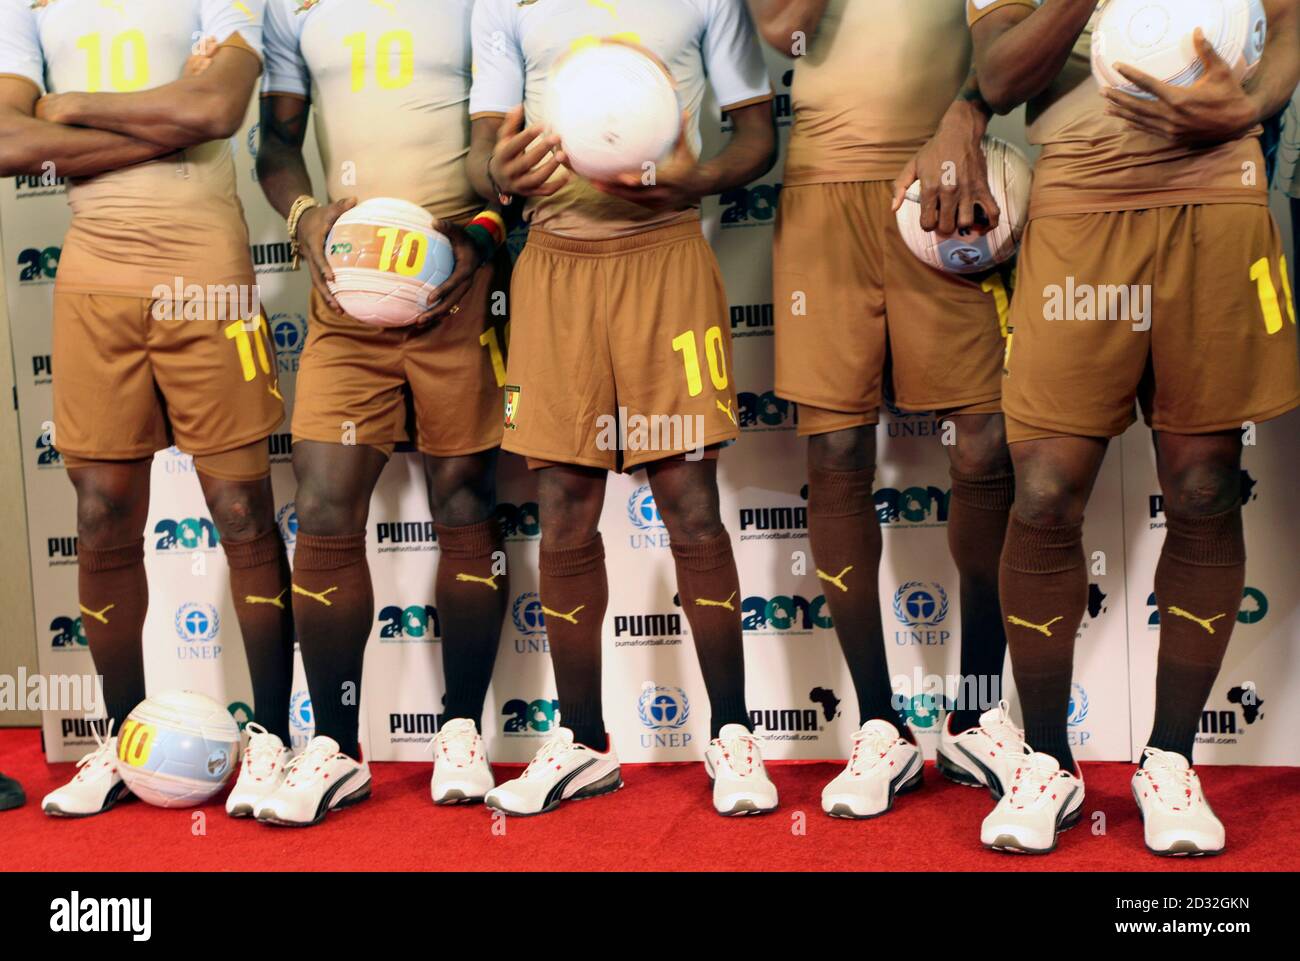 Members of the Cameroon's national football team wear the PUMA Africa Unity  Replica jersey during a news conference in Kenya's capital Nairobi, January  6, 2010. PUMA and the United Nations Environment Programme (